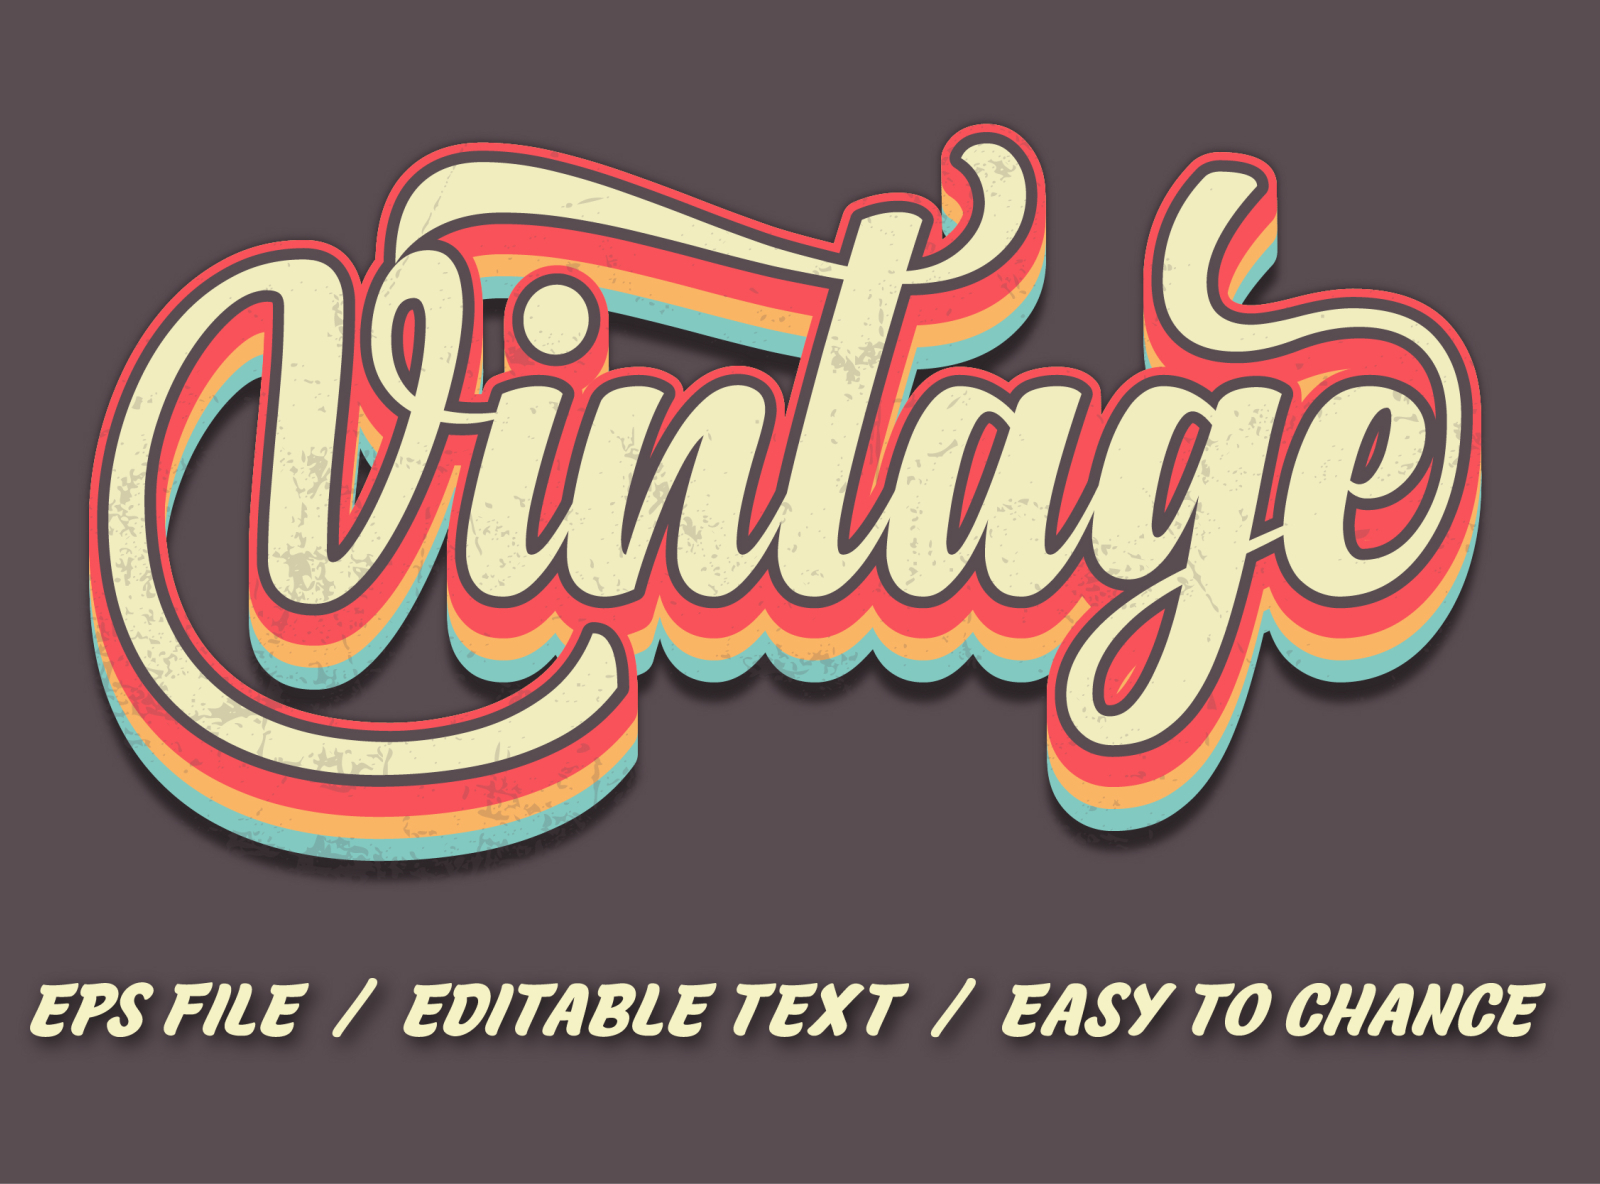 Vintage retro text effect for tshirt logo by bipulb 801 on Dribbble